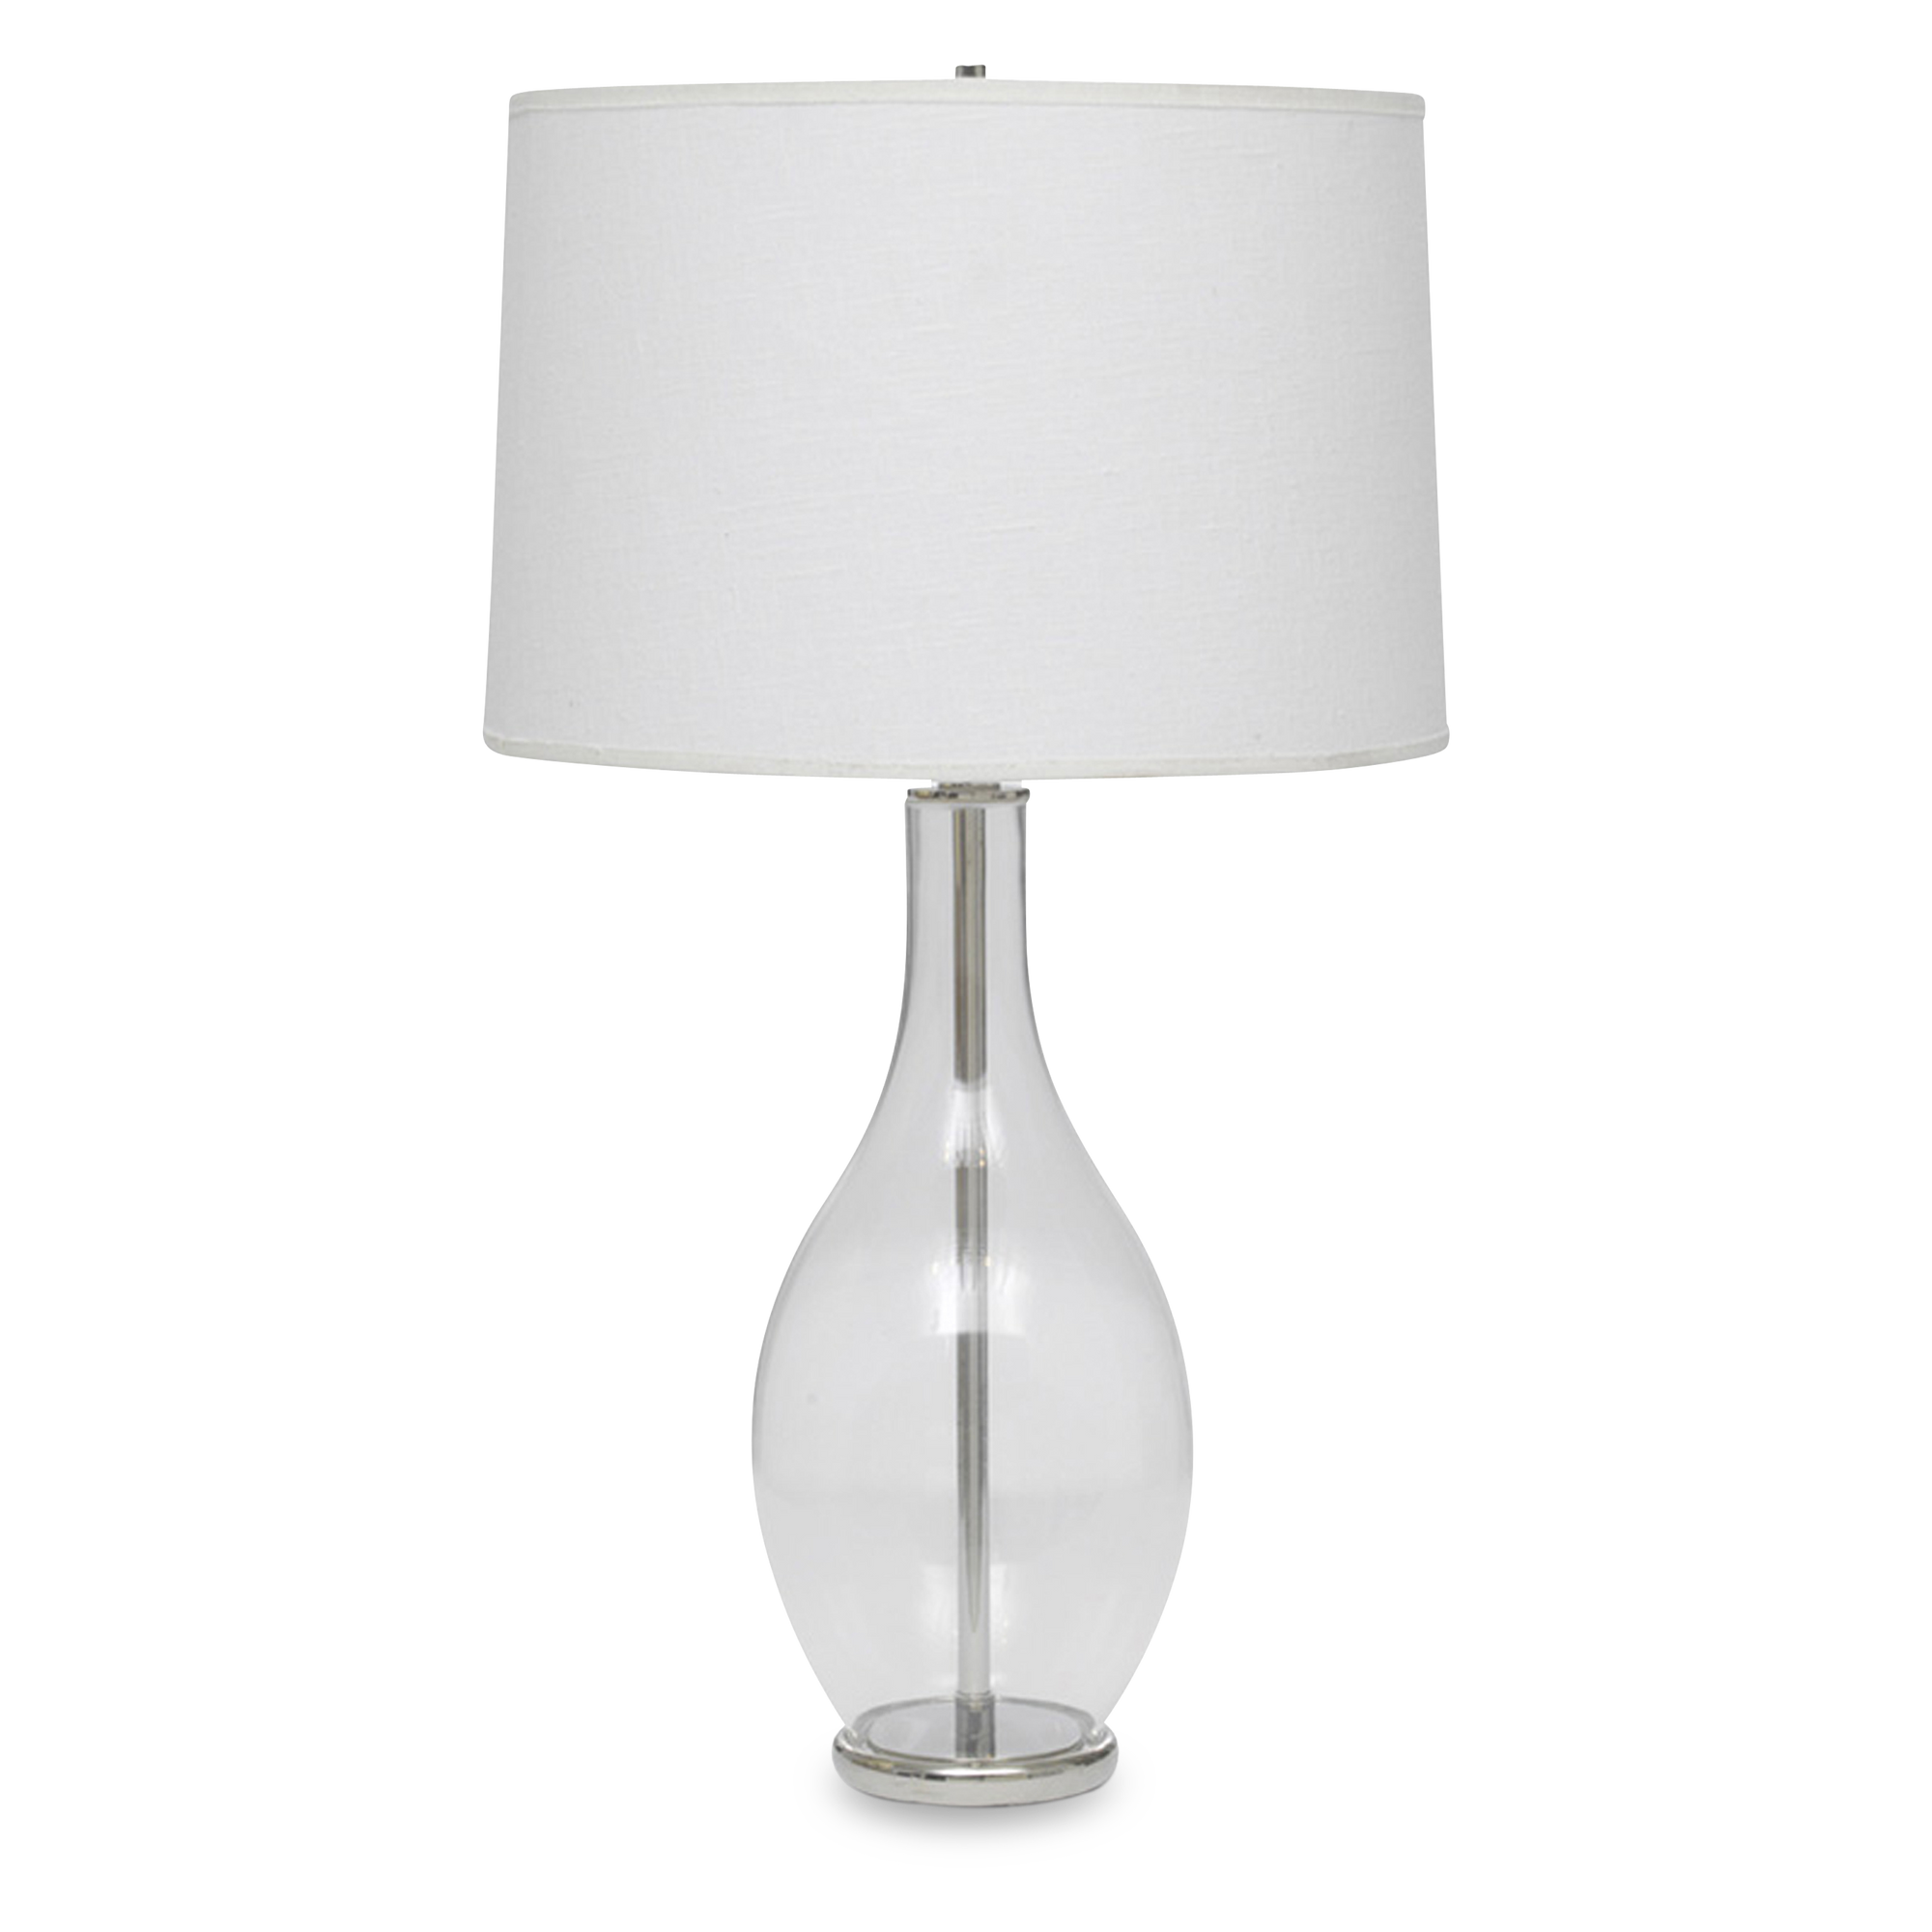 With a teardrop-shaped clear glass base, polished nickel accents, and a richly textured white linen drum shade, the Sela Table Lamp will make a chic statement in any space.